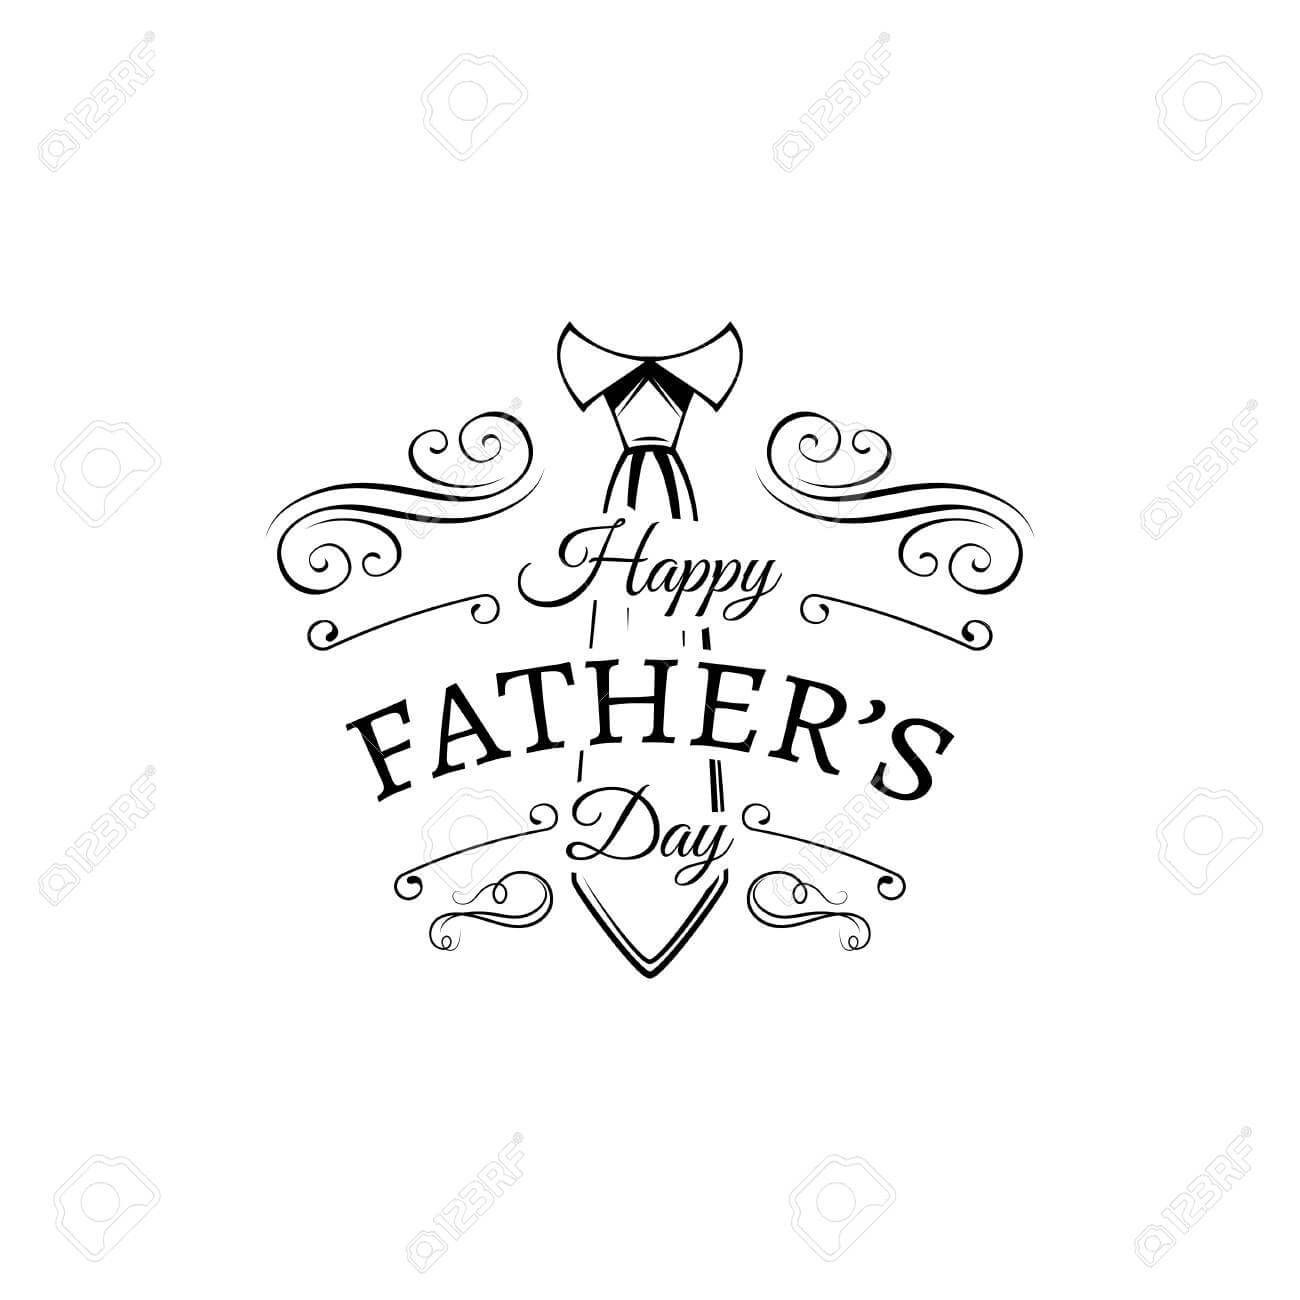 Happy Fathers Day Card Design With Necktie Vector Illustration Within Fathers Day Card Template